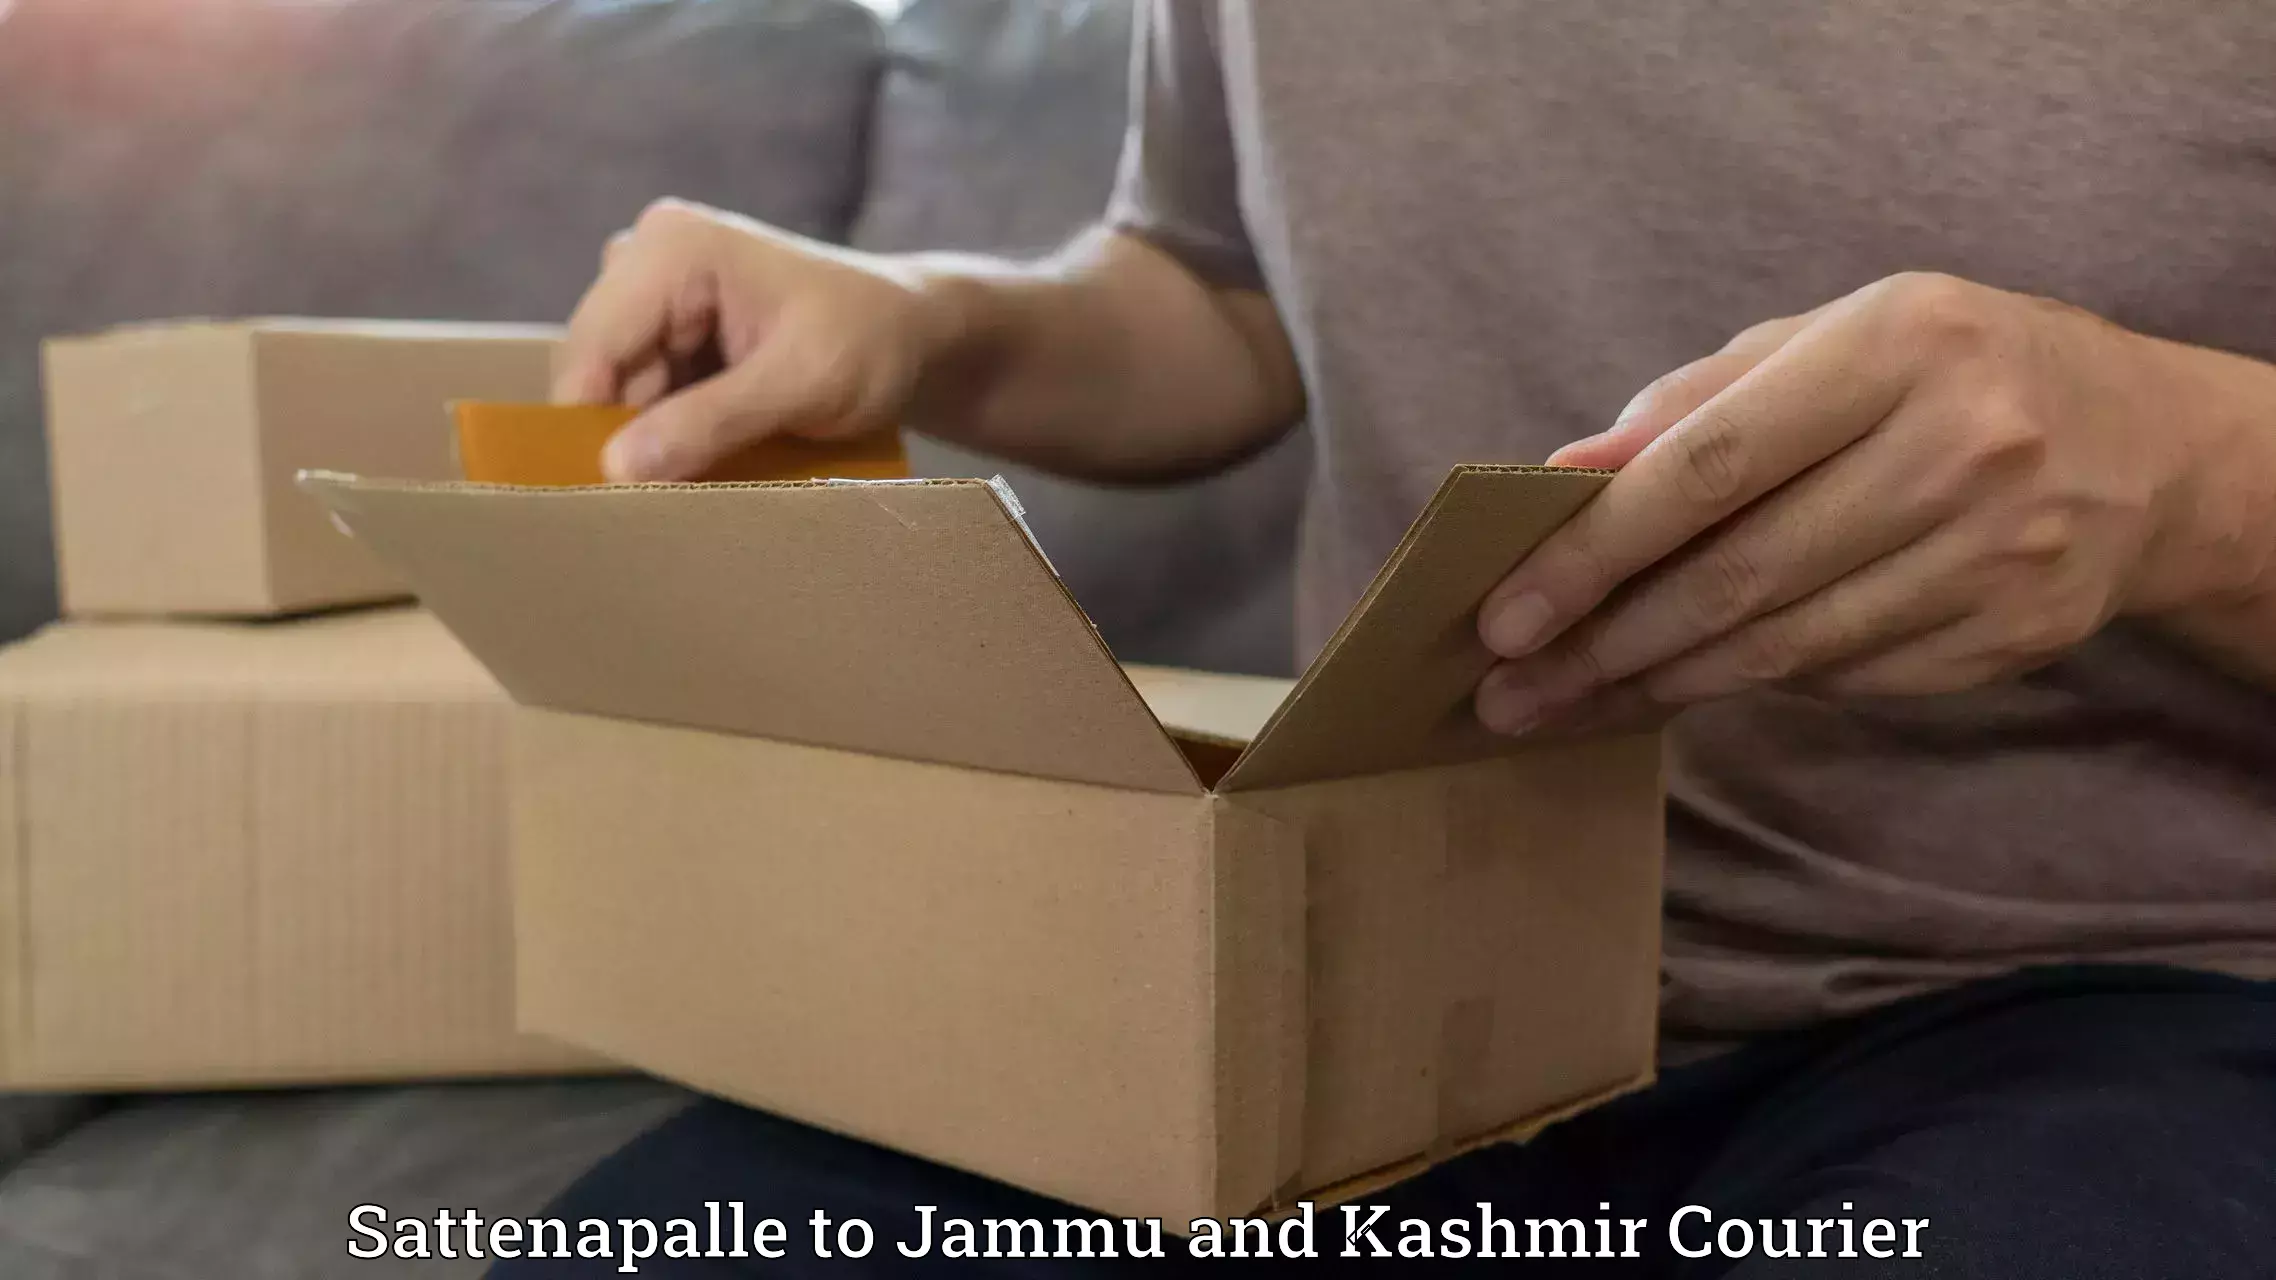 High-priority parcel service Sattenapalle to Rajouri